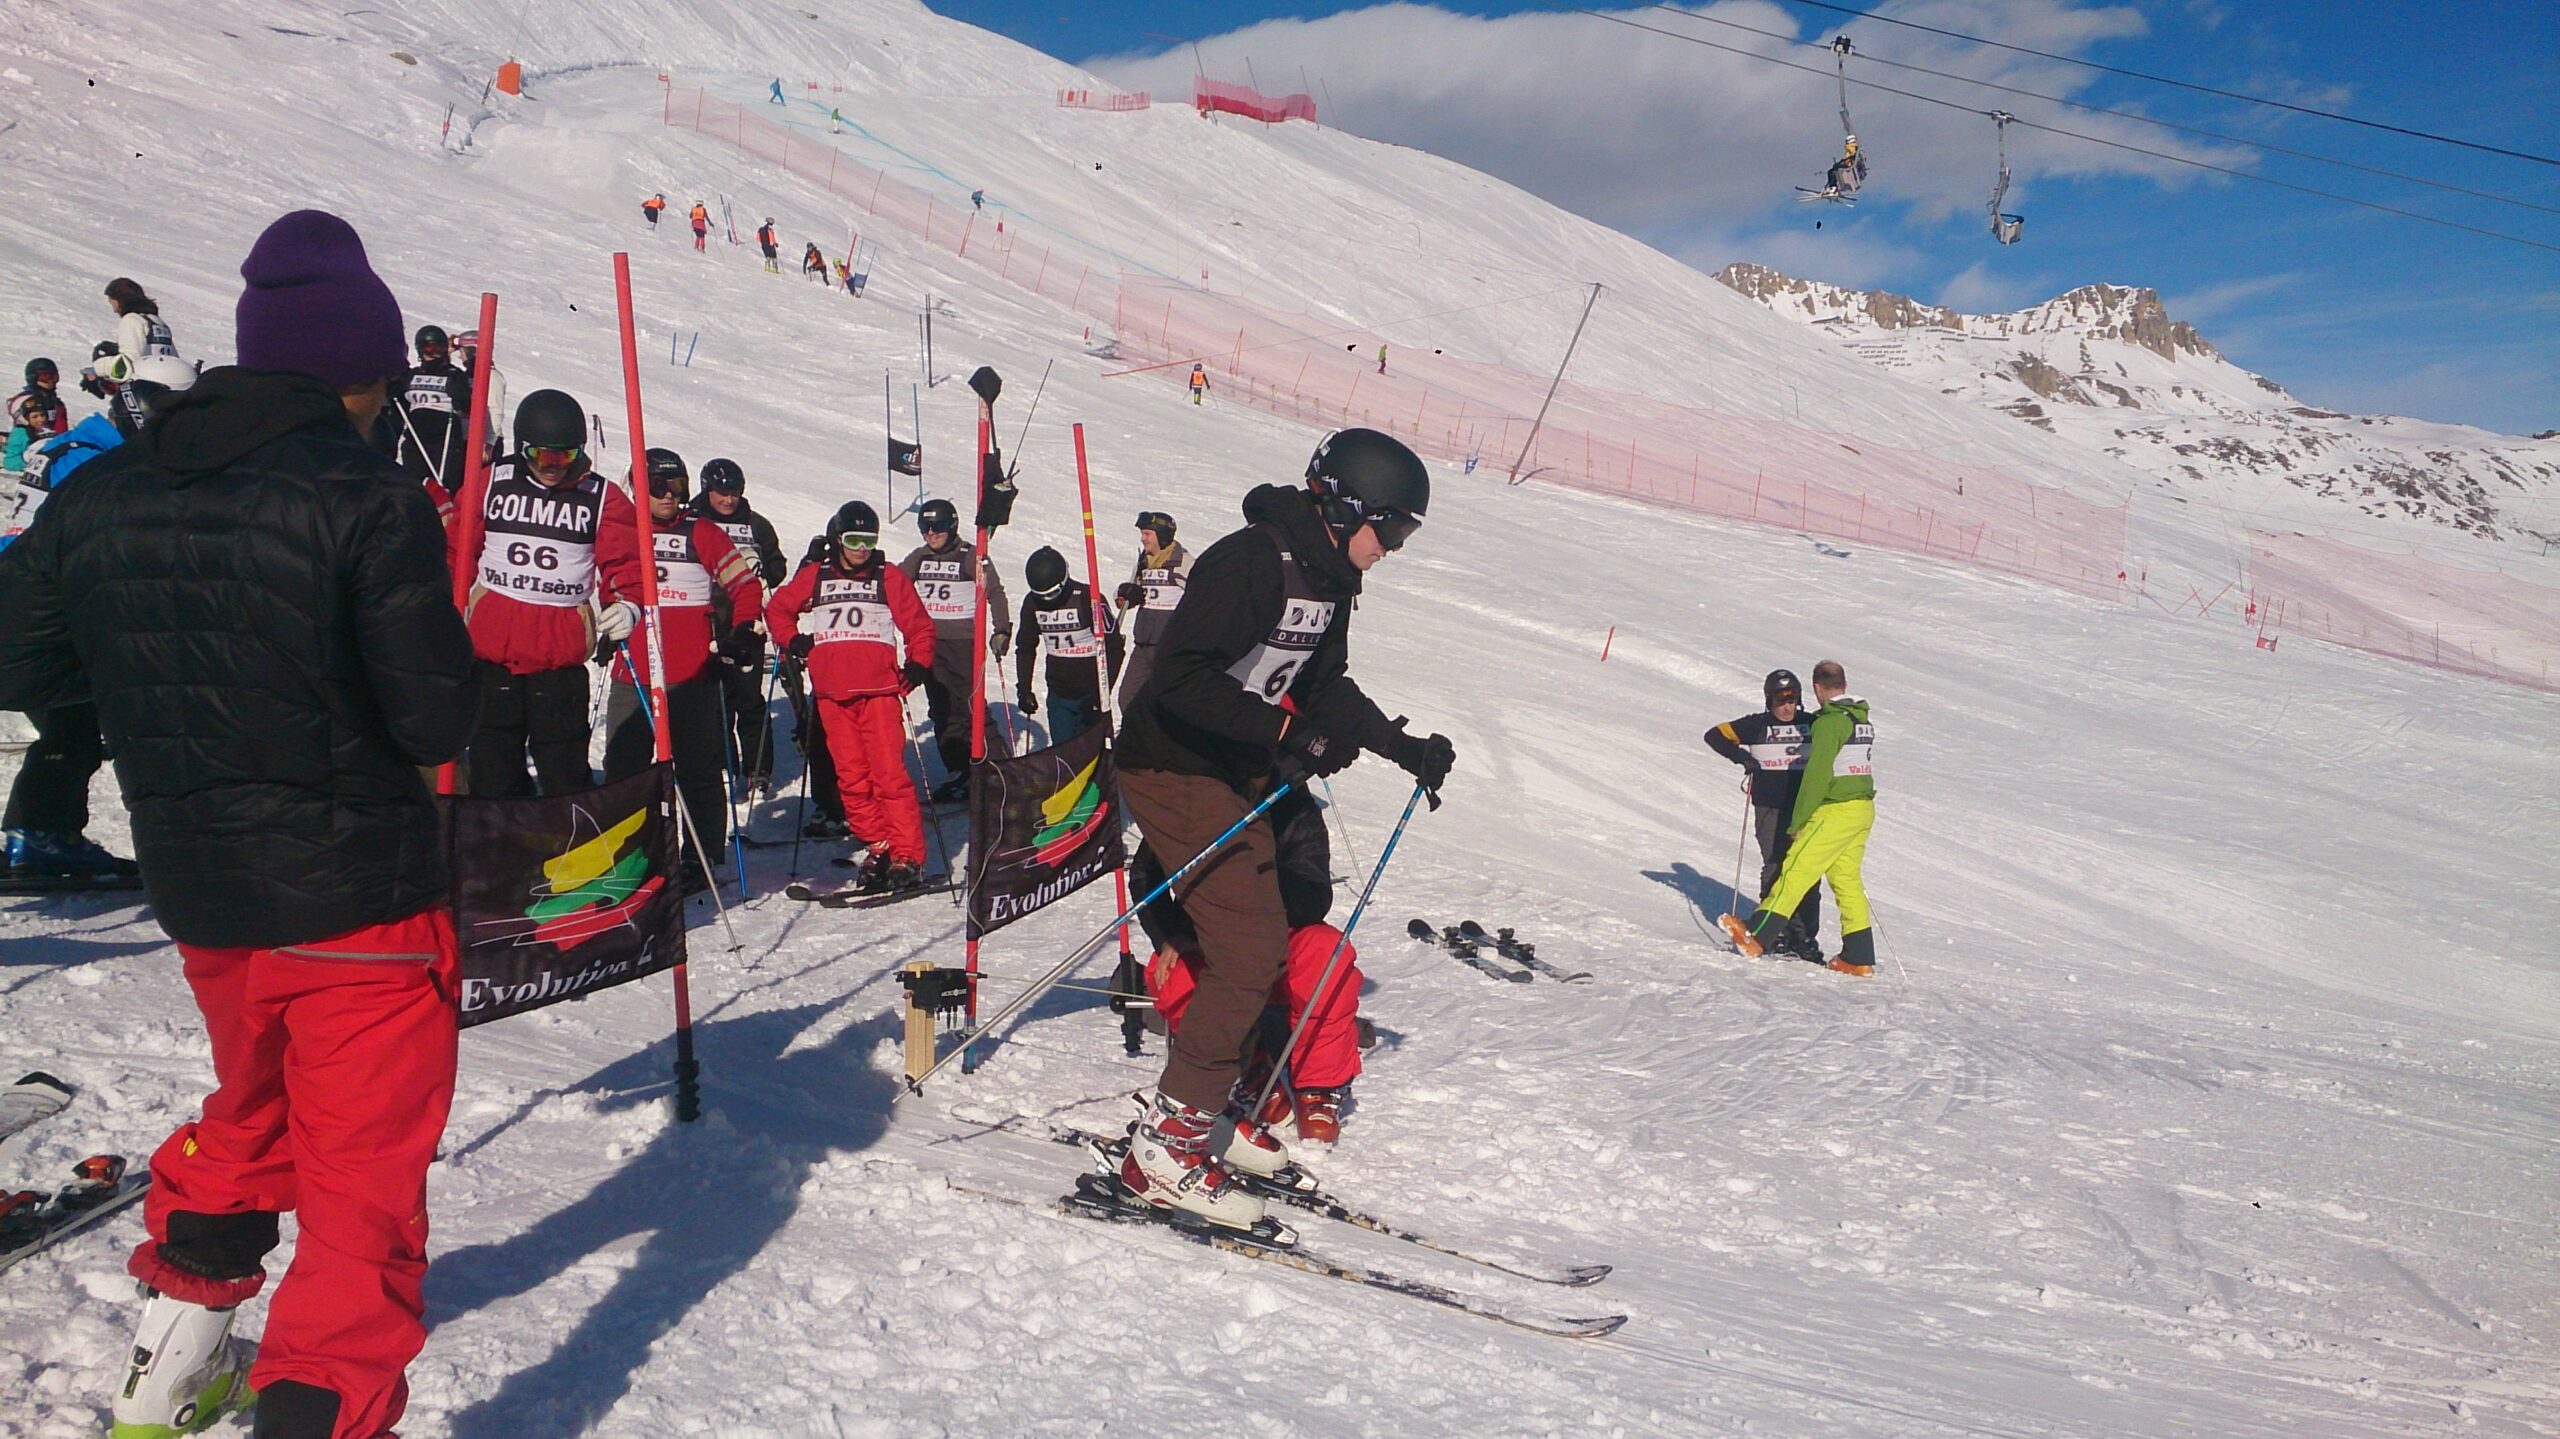 Featured image for “Chester Reservist takes part in winter skiing competition”